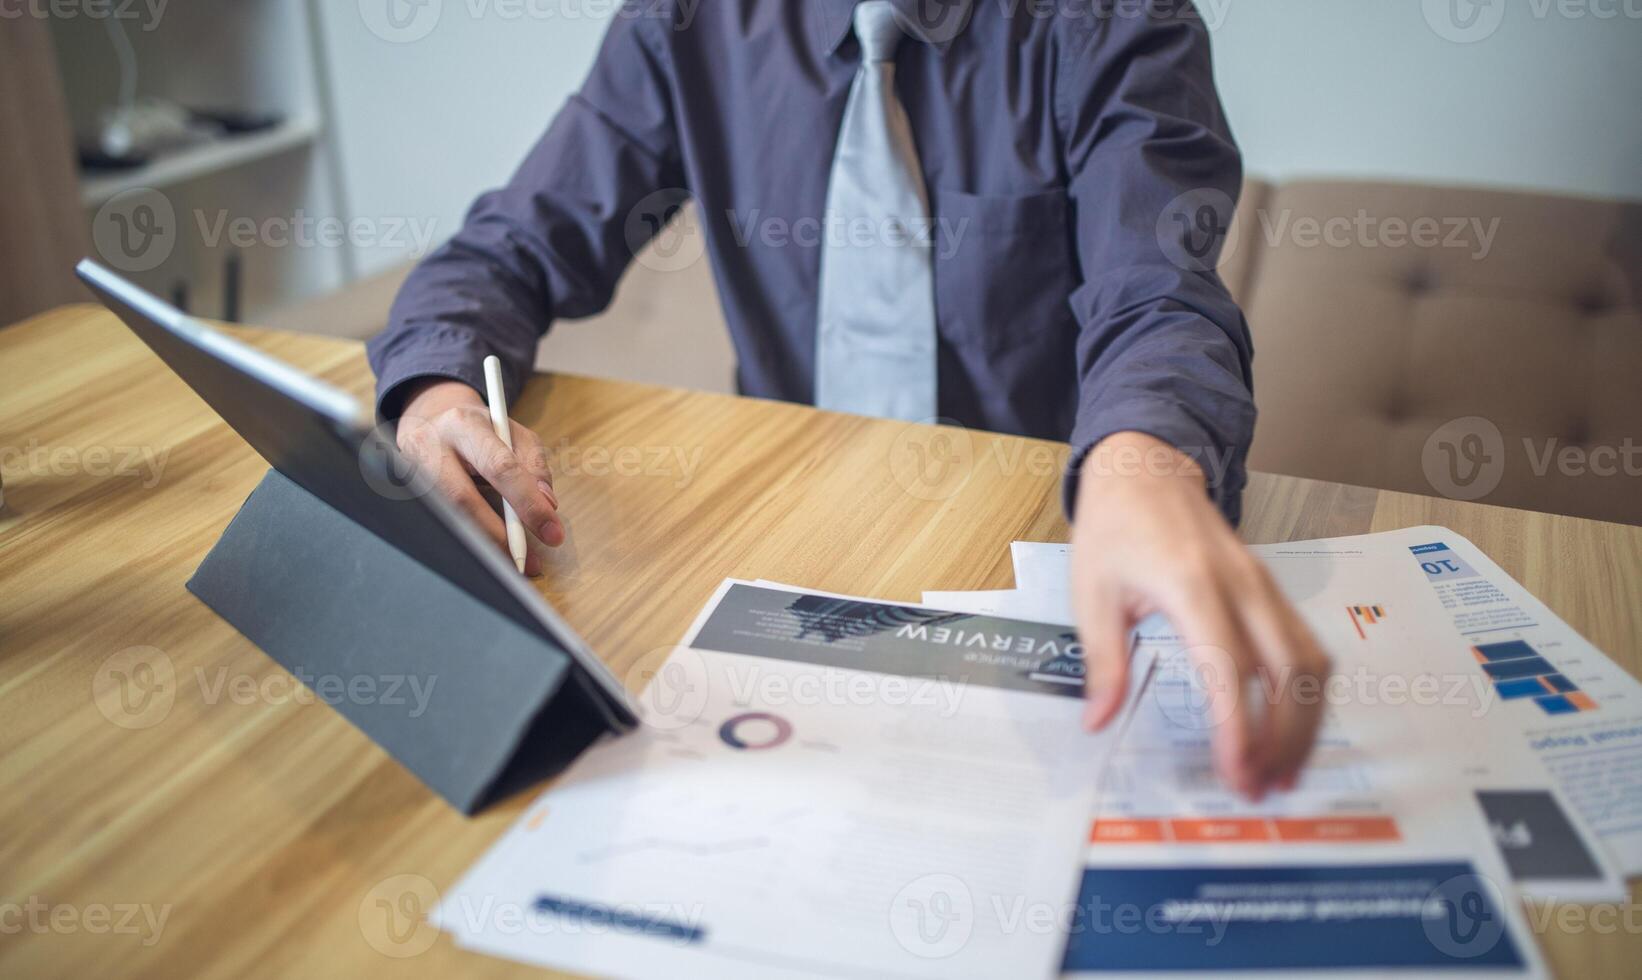 Businessman analyzing bar graph data with pen in hand, laptop and coffee on desk. Business concept photo